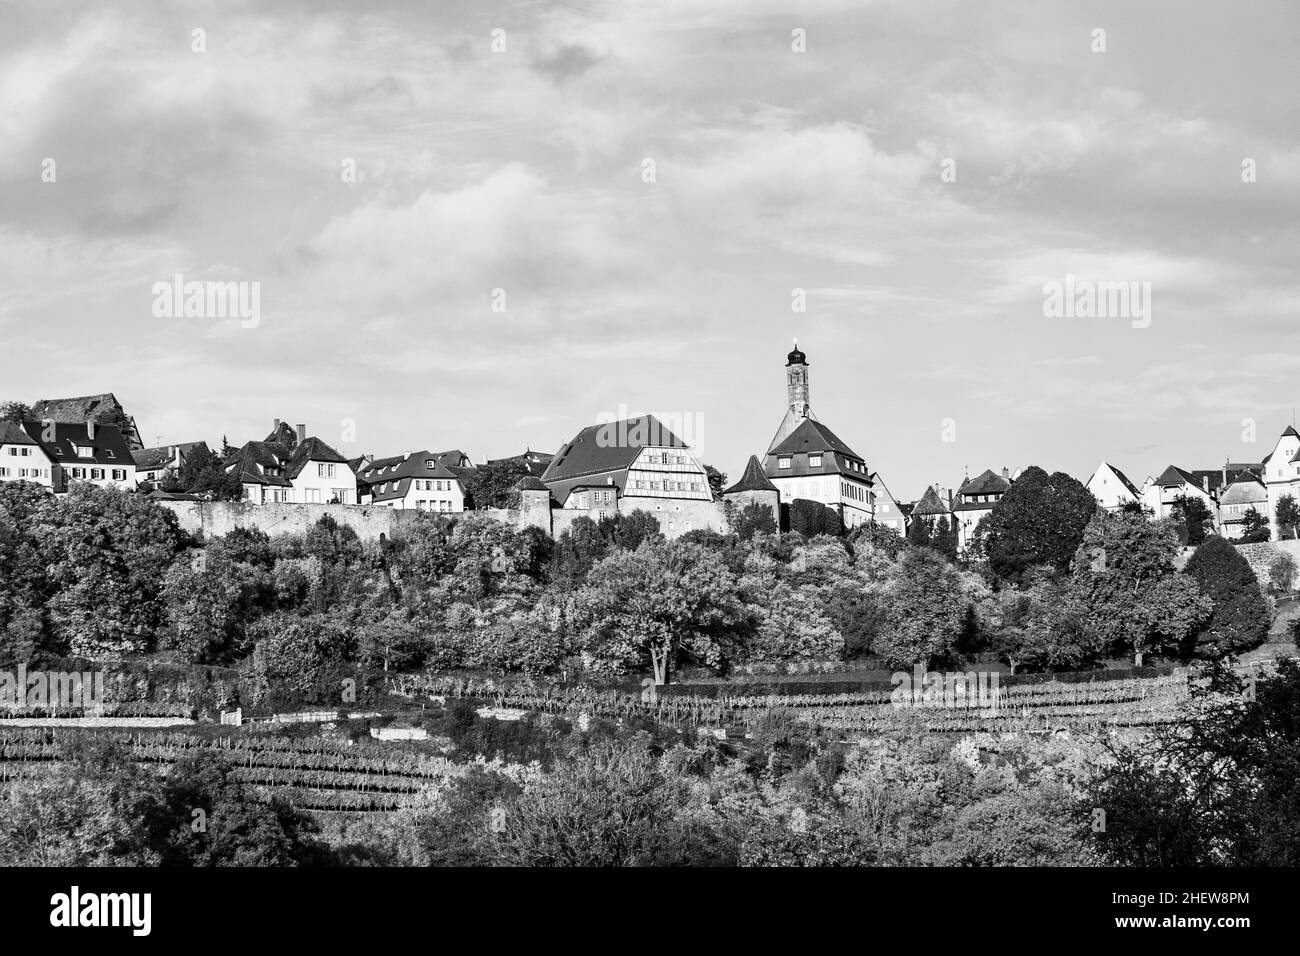 Rothenburg ob der Tauber, old famous city from medieval times seen from the romantic valley of the river Tauber Stock Photo